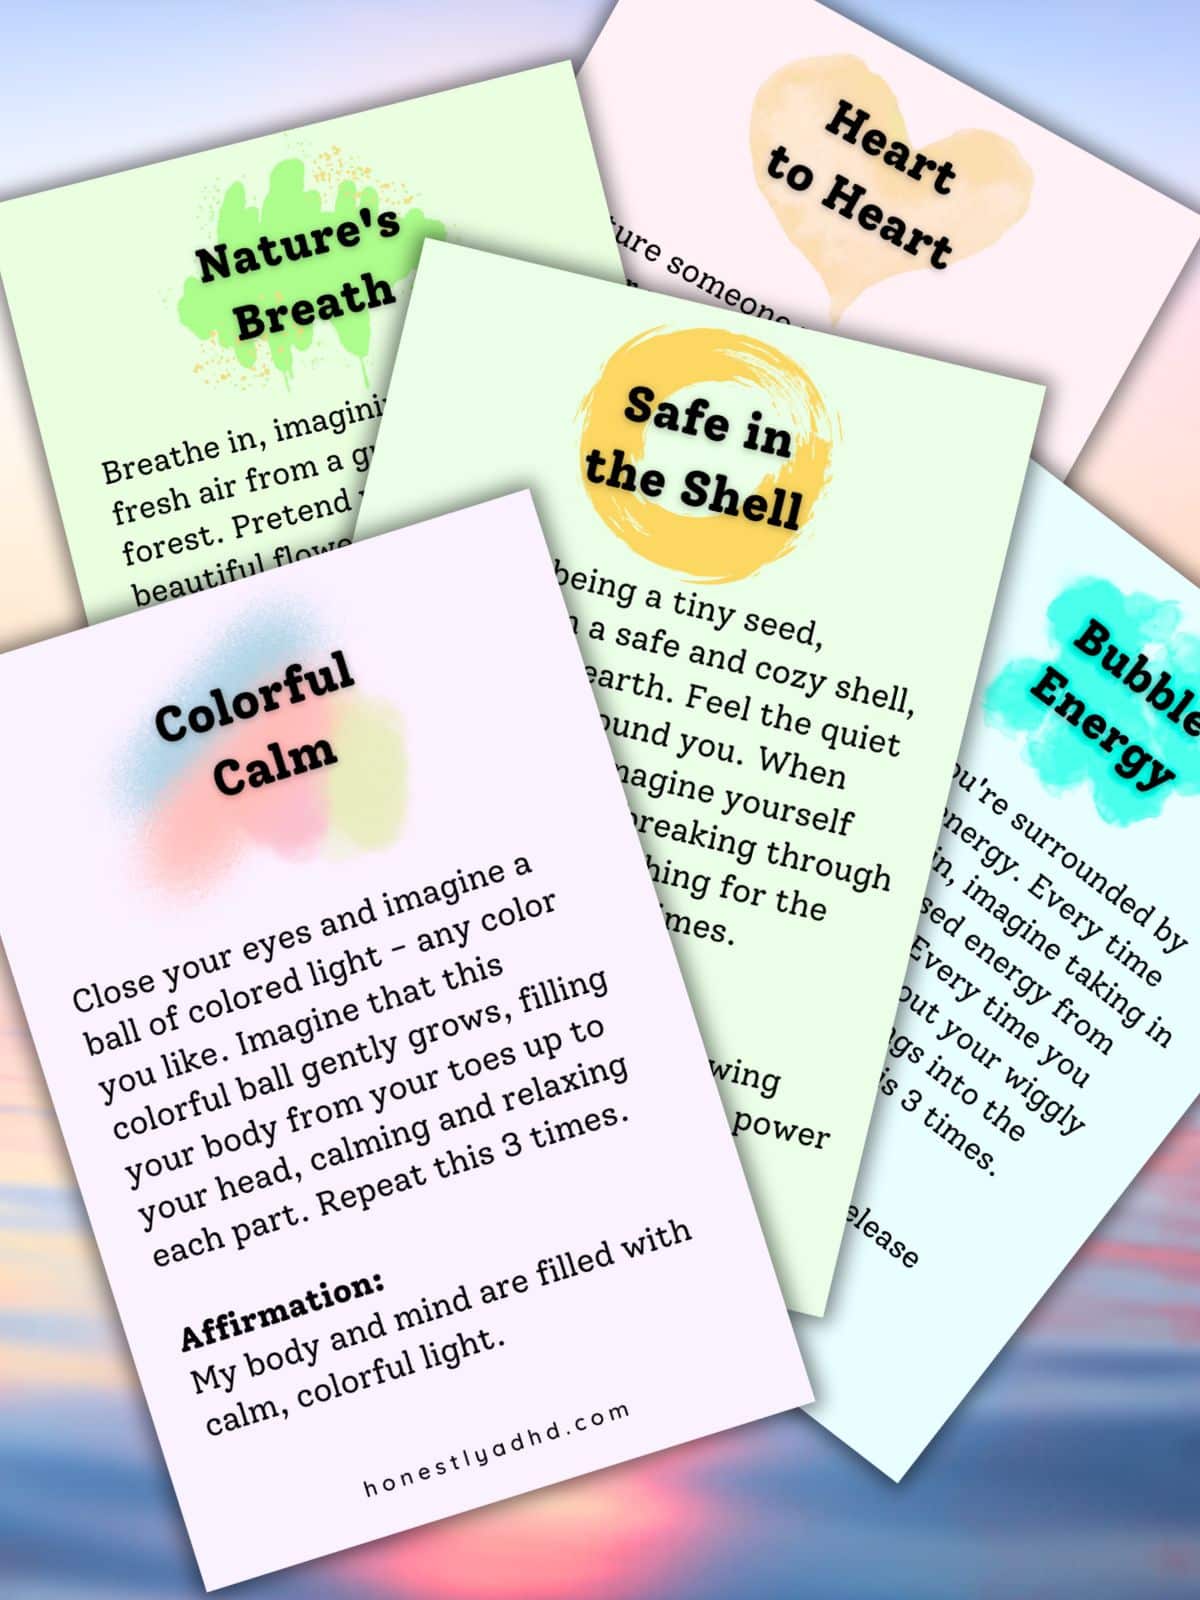 Several colorful and fun printable meditation exercises.